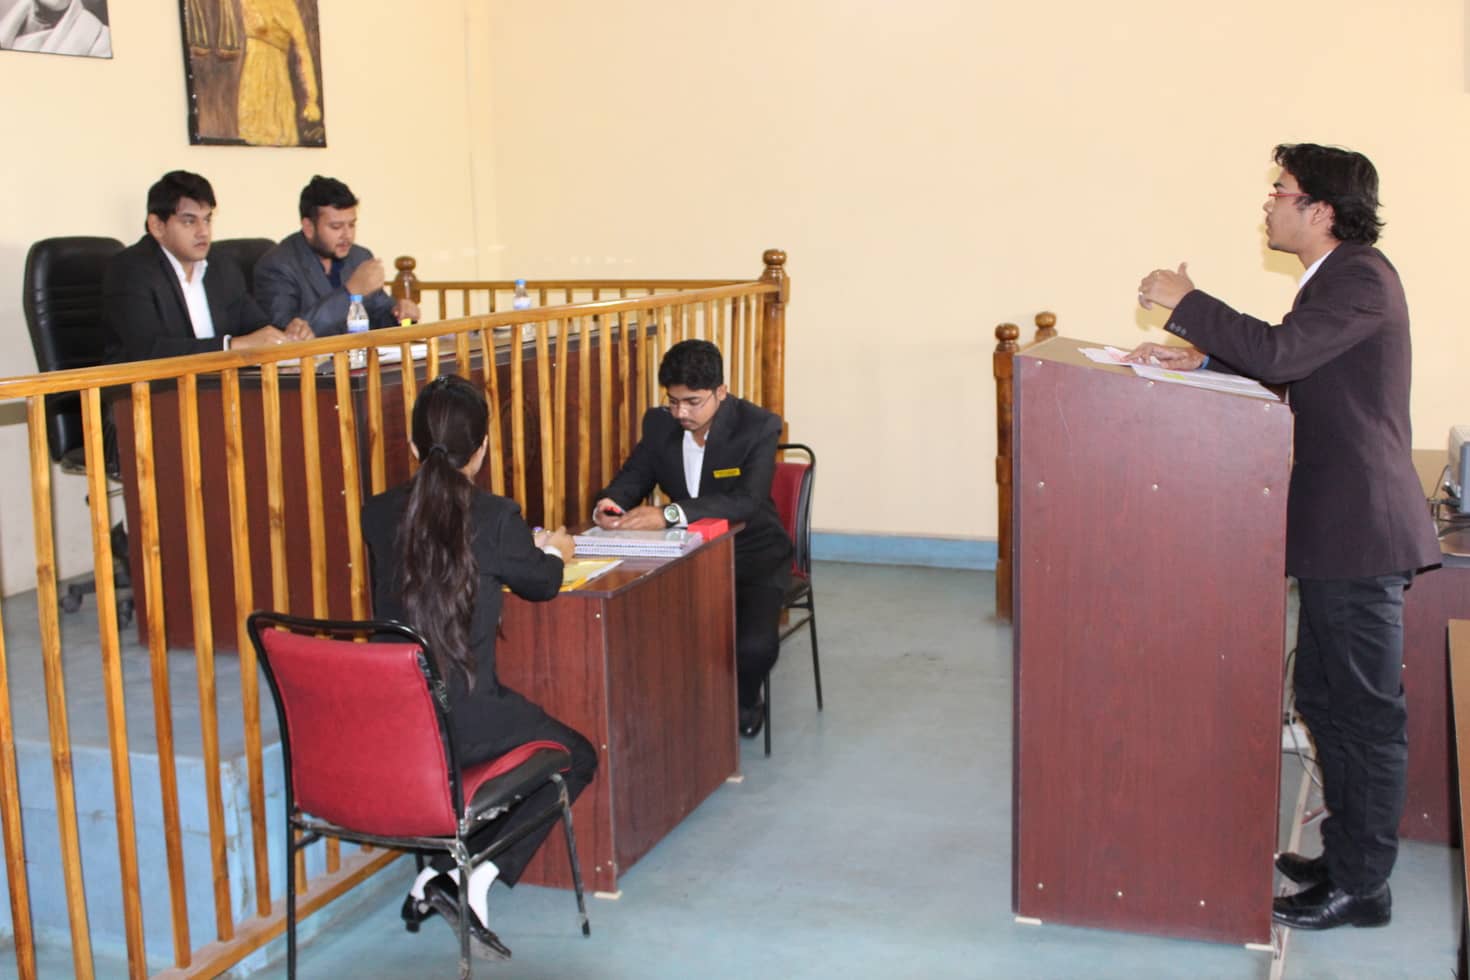 Moot Court Session